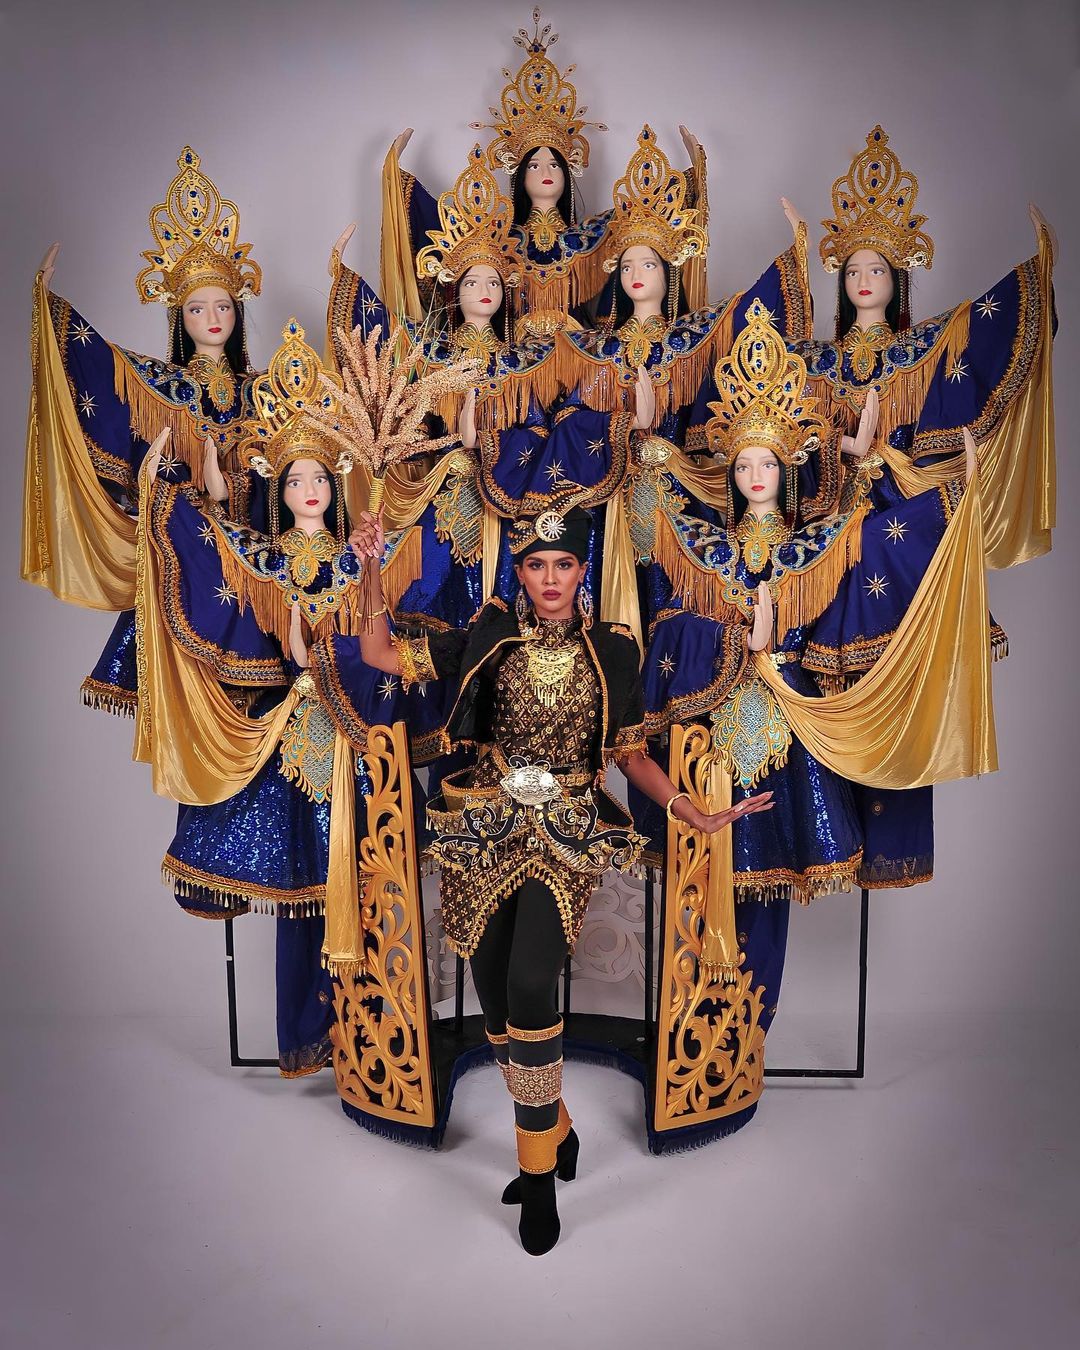 The Ulek Mayang costume that weighed over 50 kilos